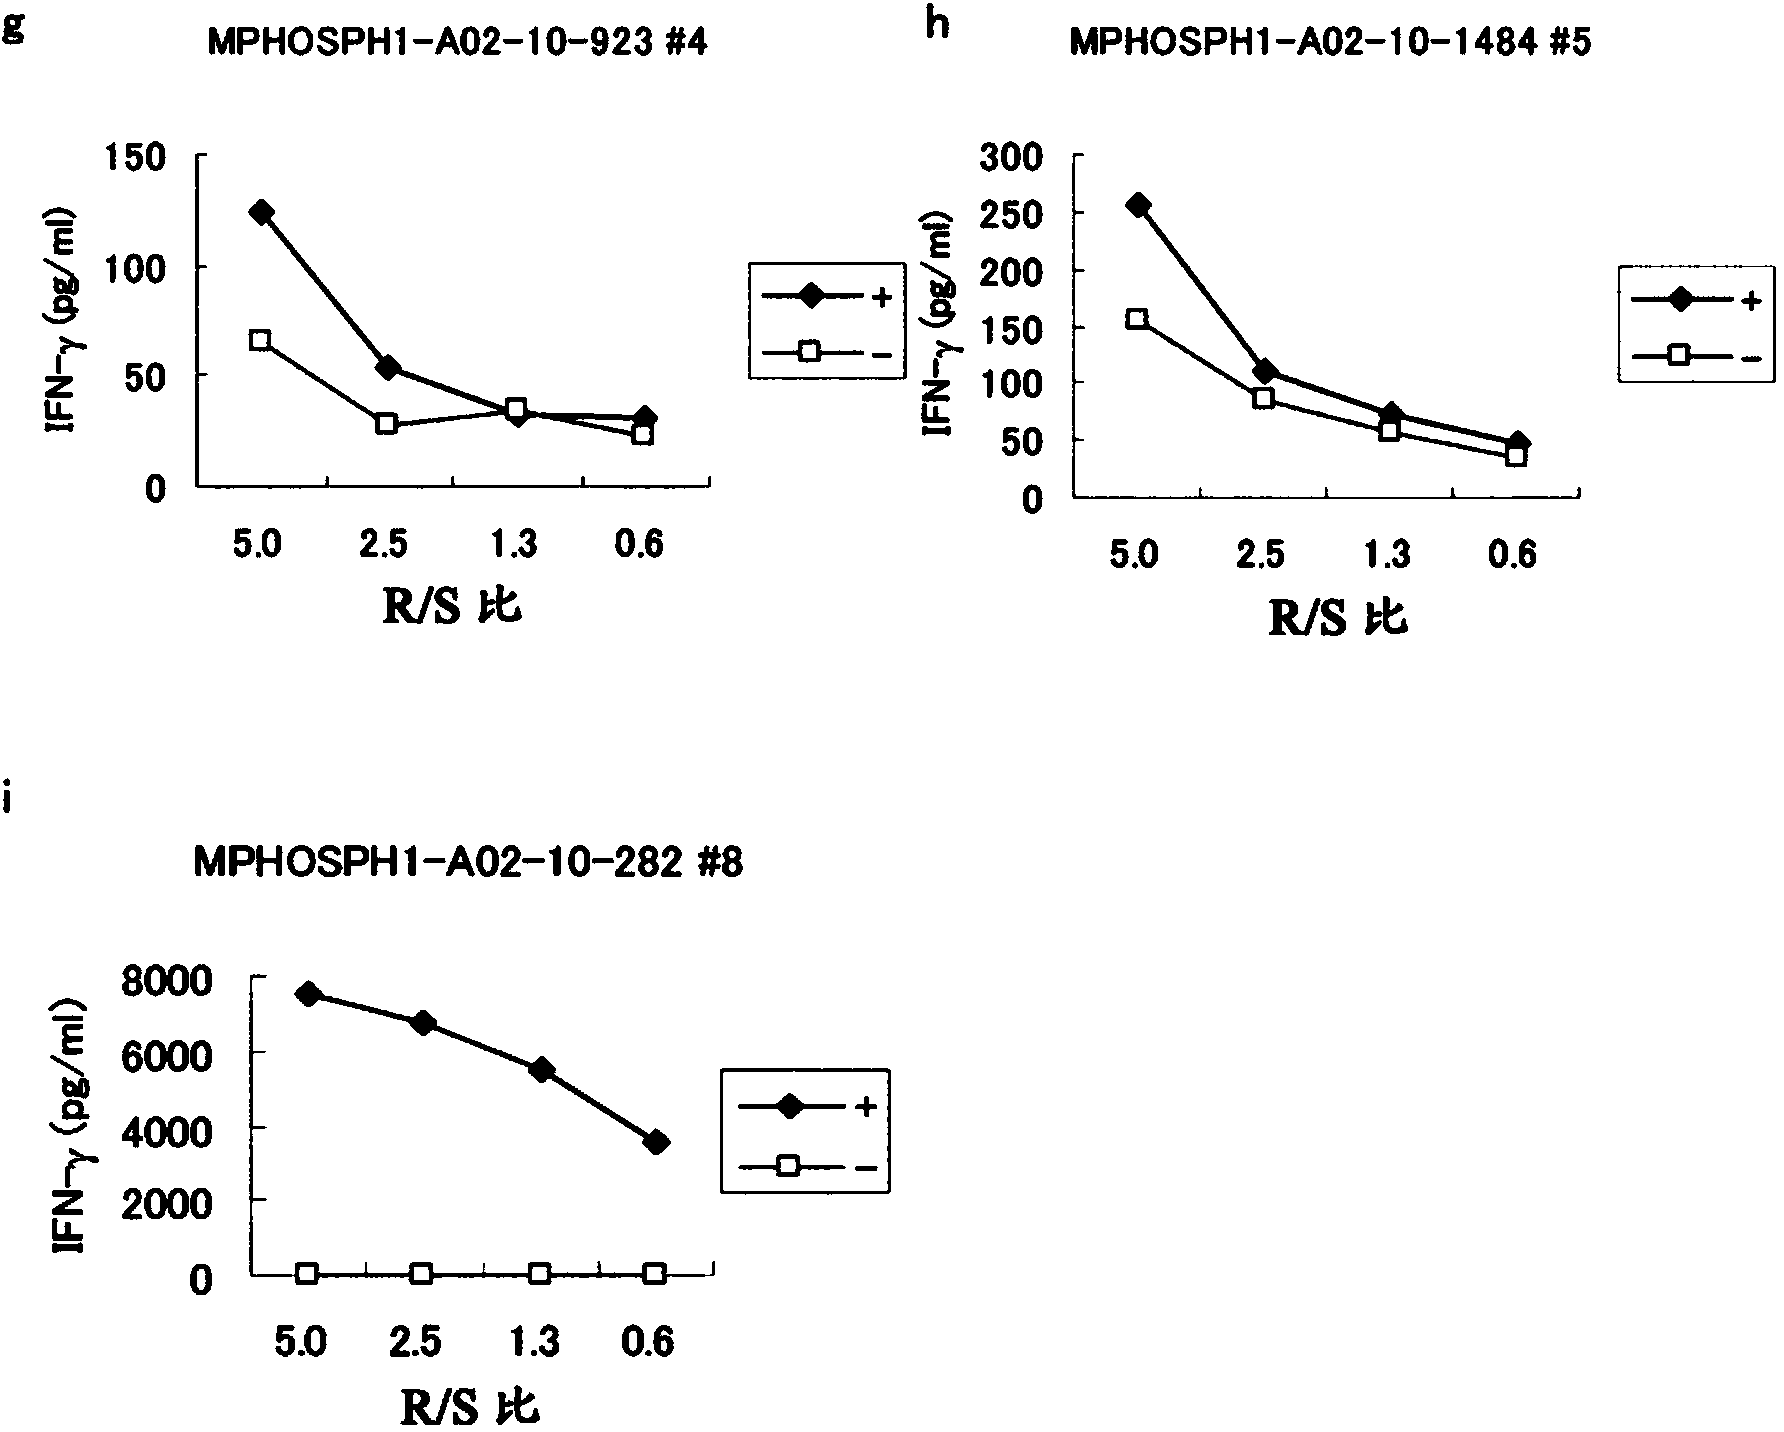 Mphosph1 peptides and vaccines including the same